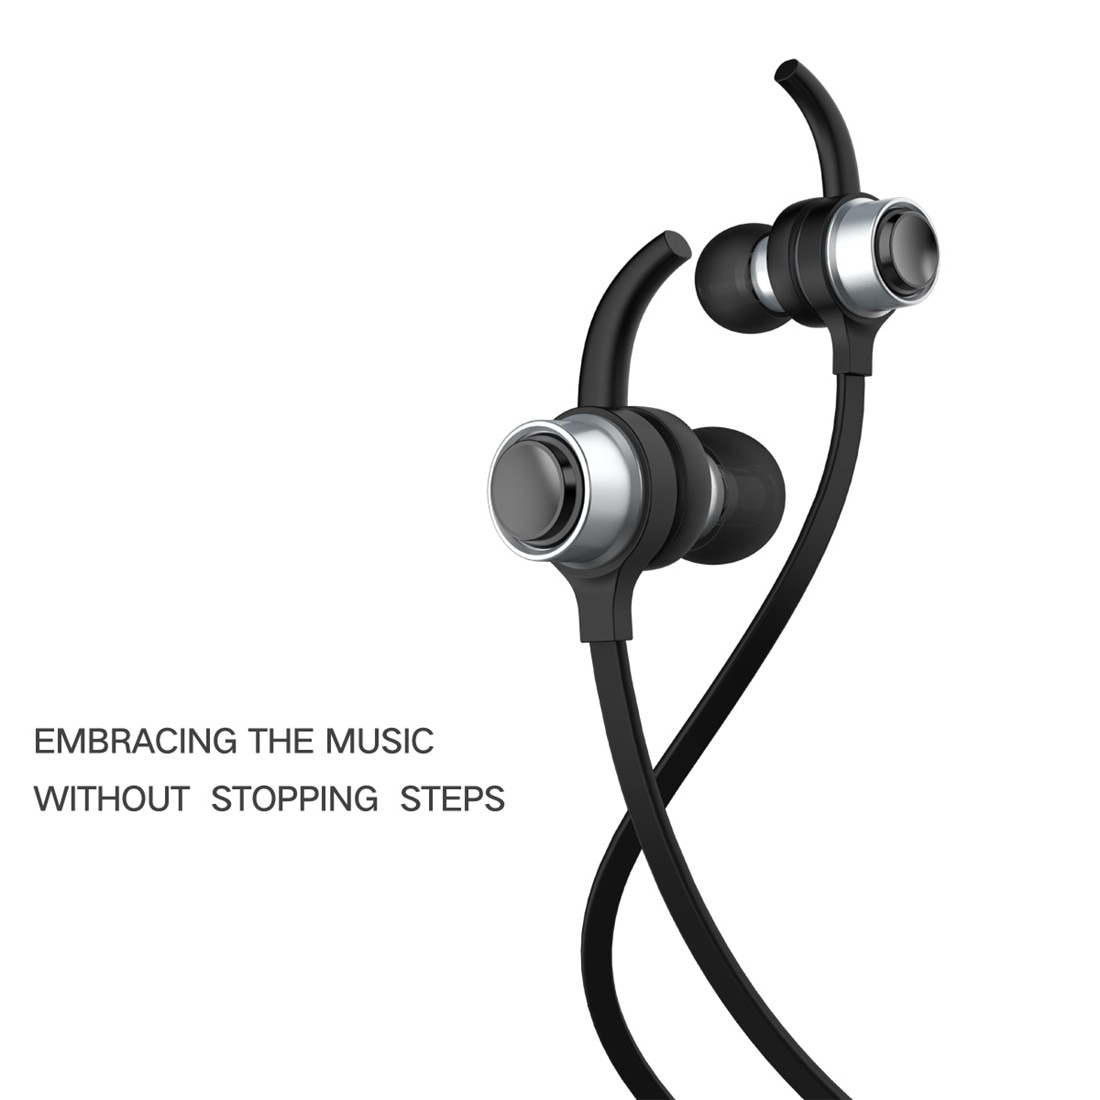 Bluetooth 4.1 Earphone In-Ear iPhone & Android Smart Phone